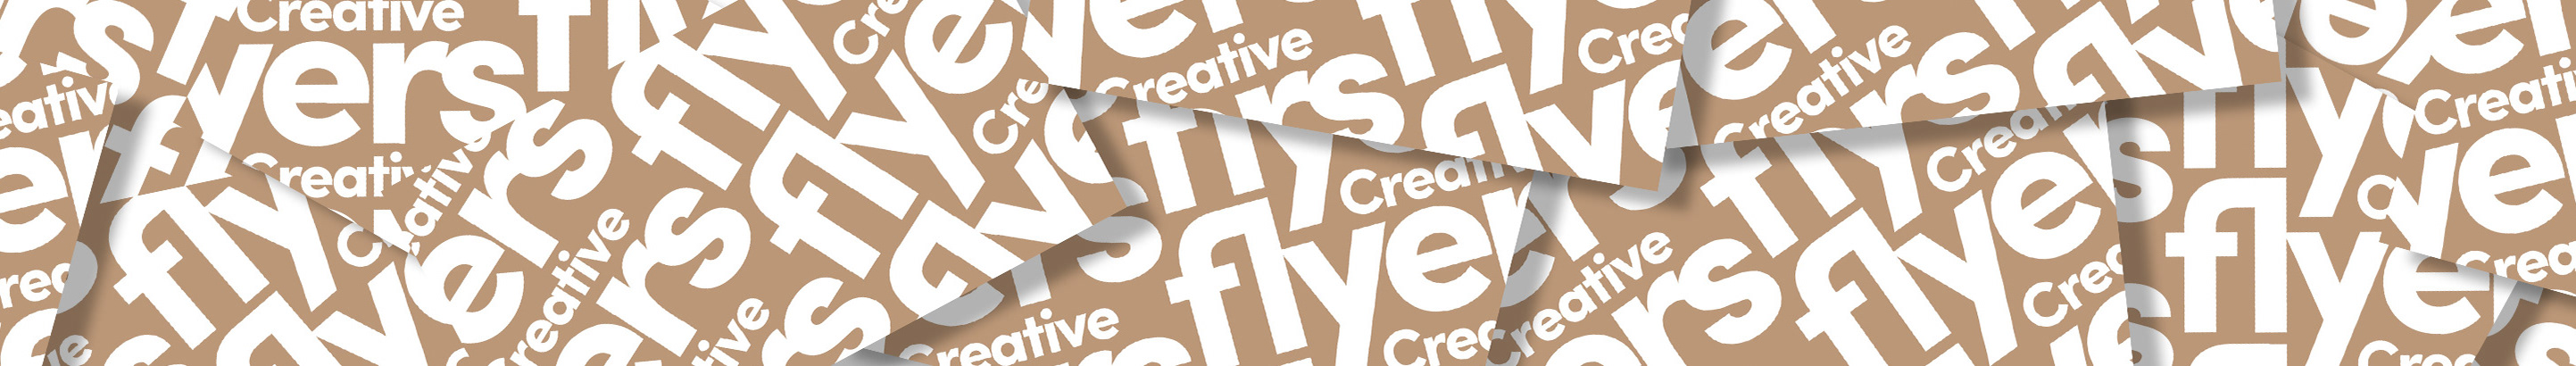 Creative Flyers's profile banner